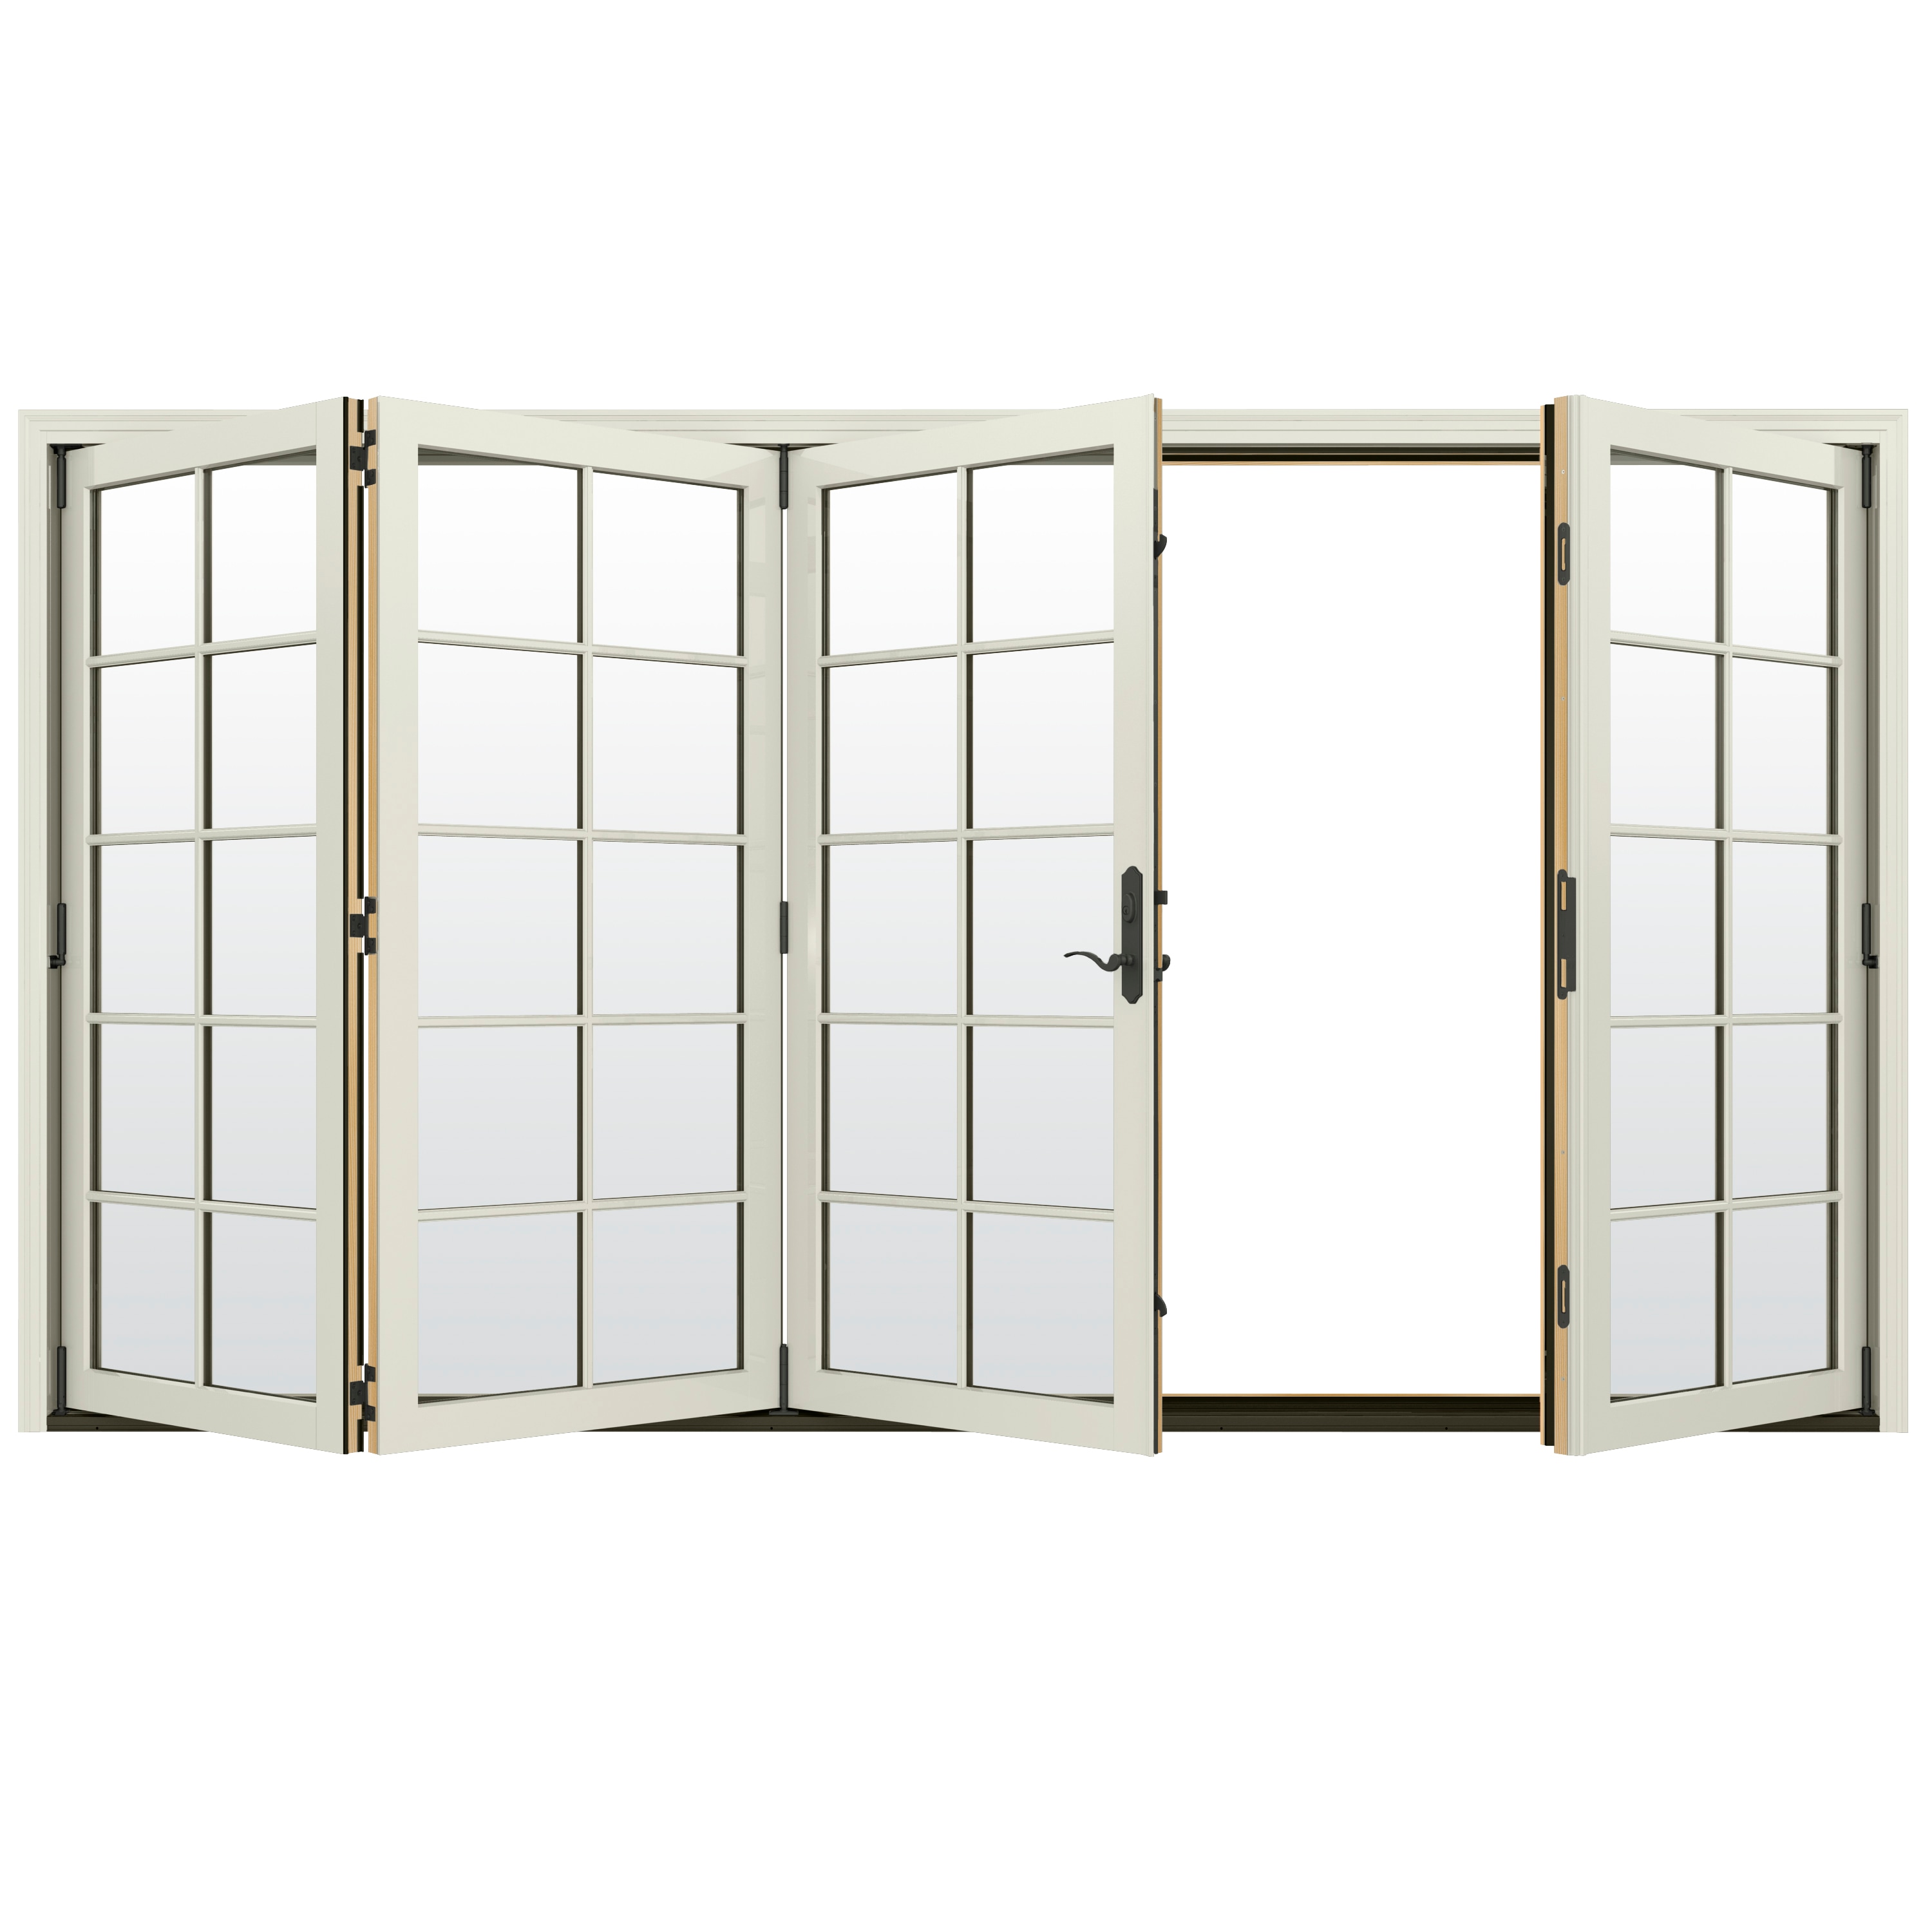 124-in x 80-in Low-e Argon Simulated Divided Light Vanilla Clad-wood Folding Left-Hand Outswing Patio Door in Off-White | - JELD-WEN LOWOLJW247800094